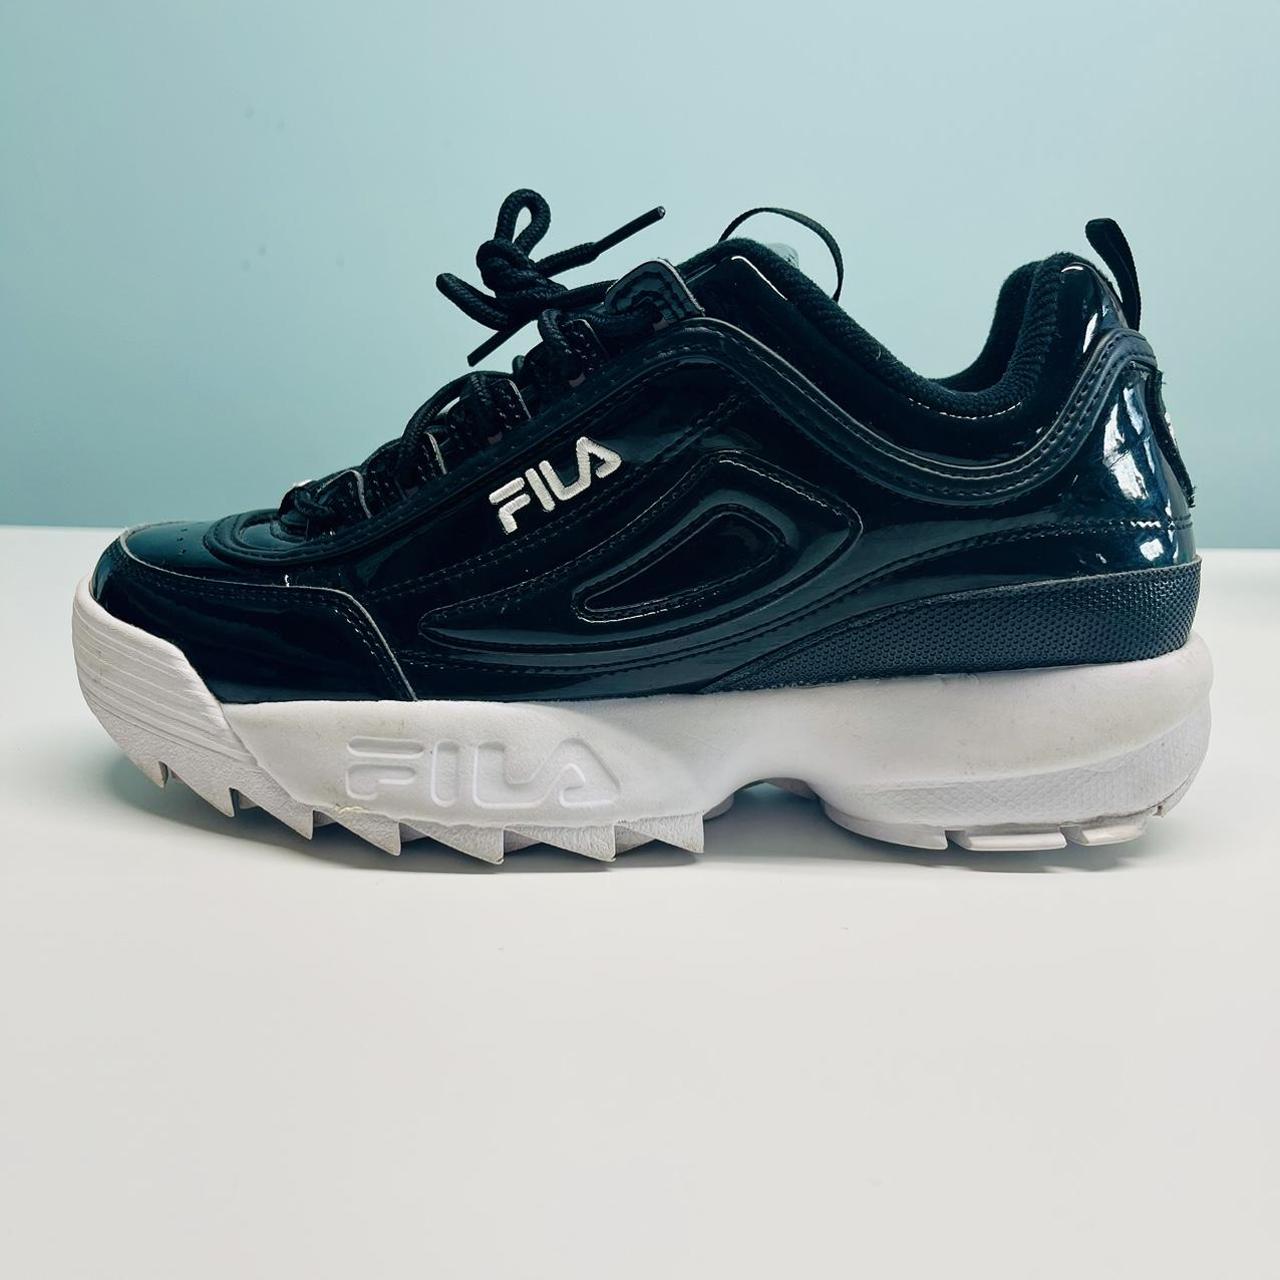 Fila Women's Black and White Trainers | Depop